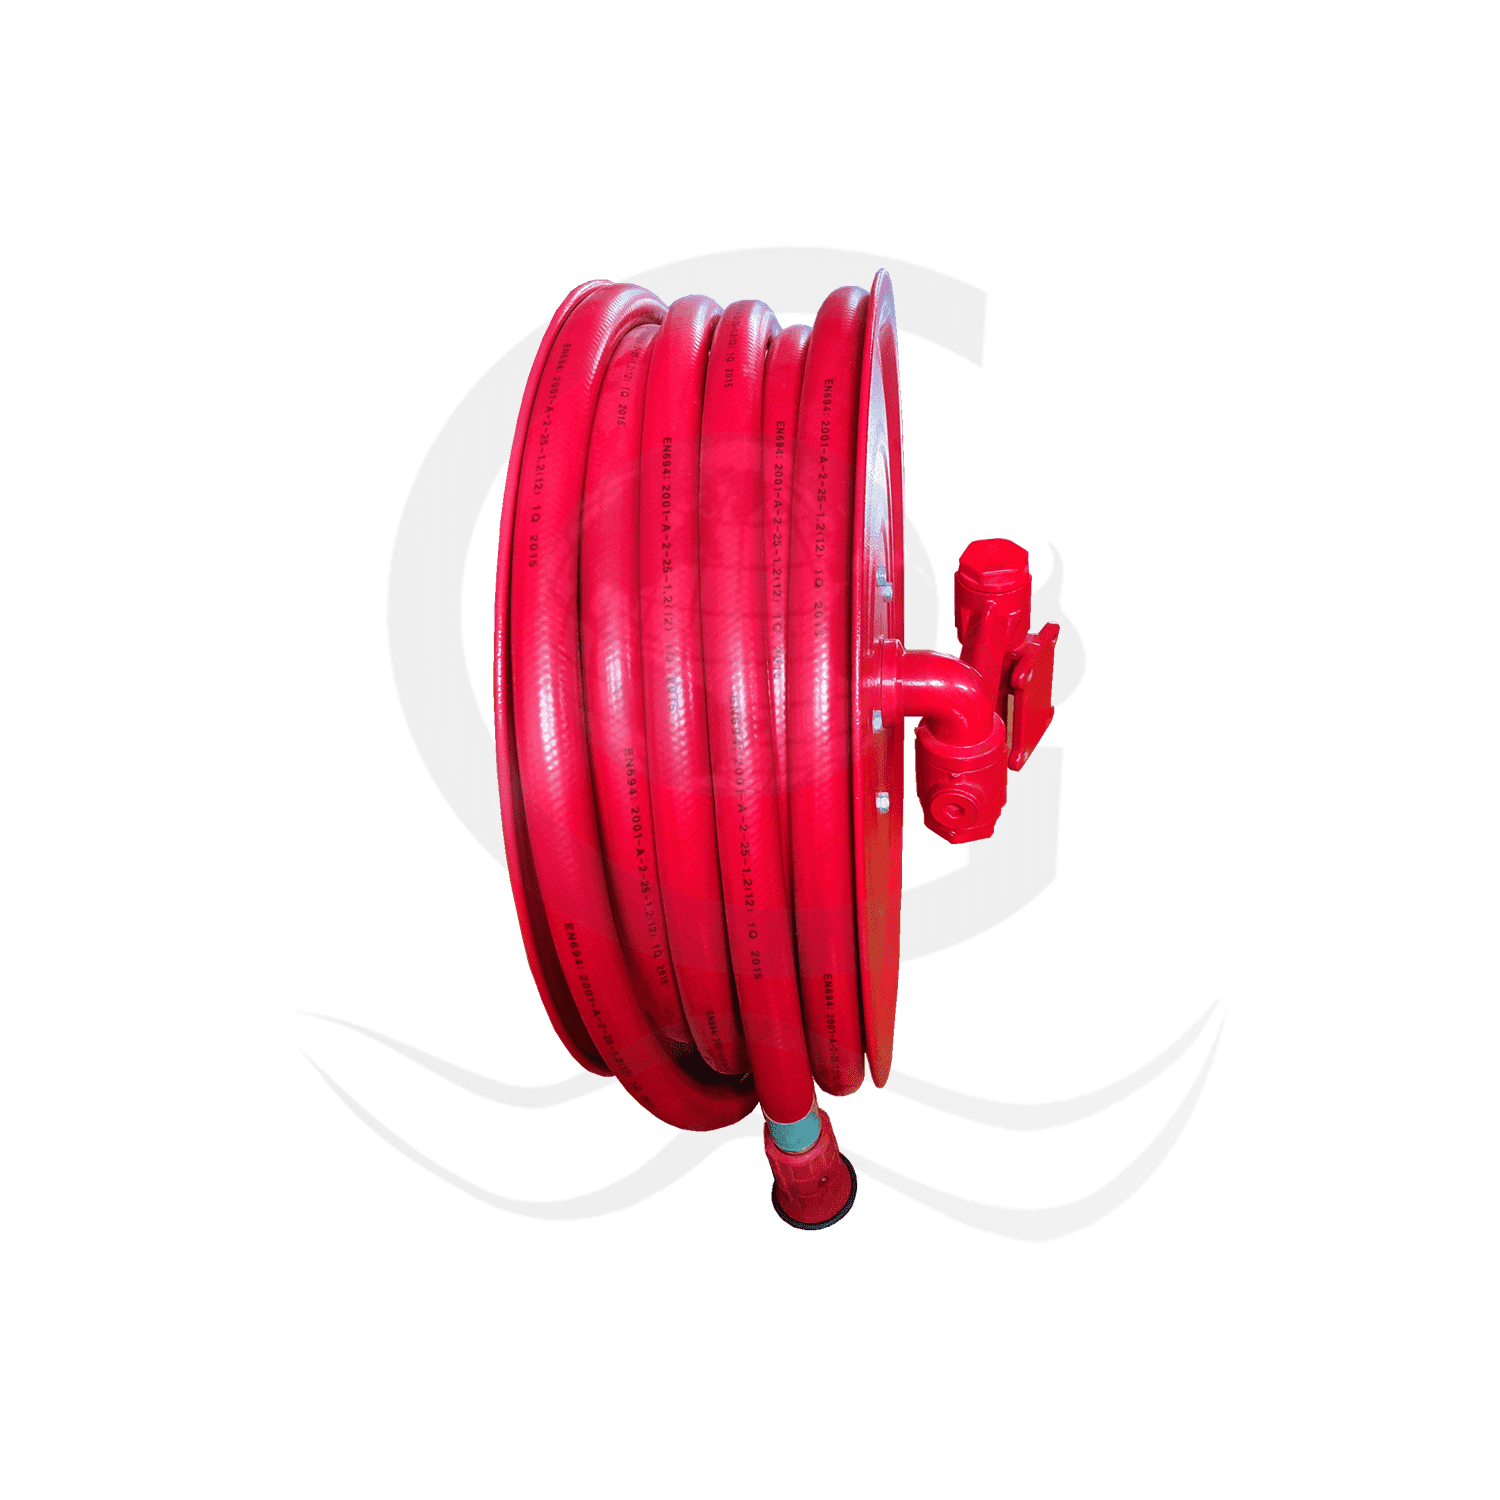 China Fire hose reel Manufacture and Factory